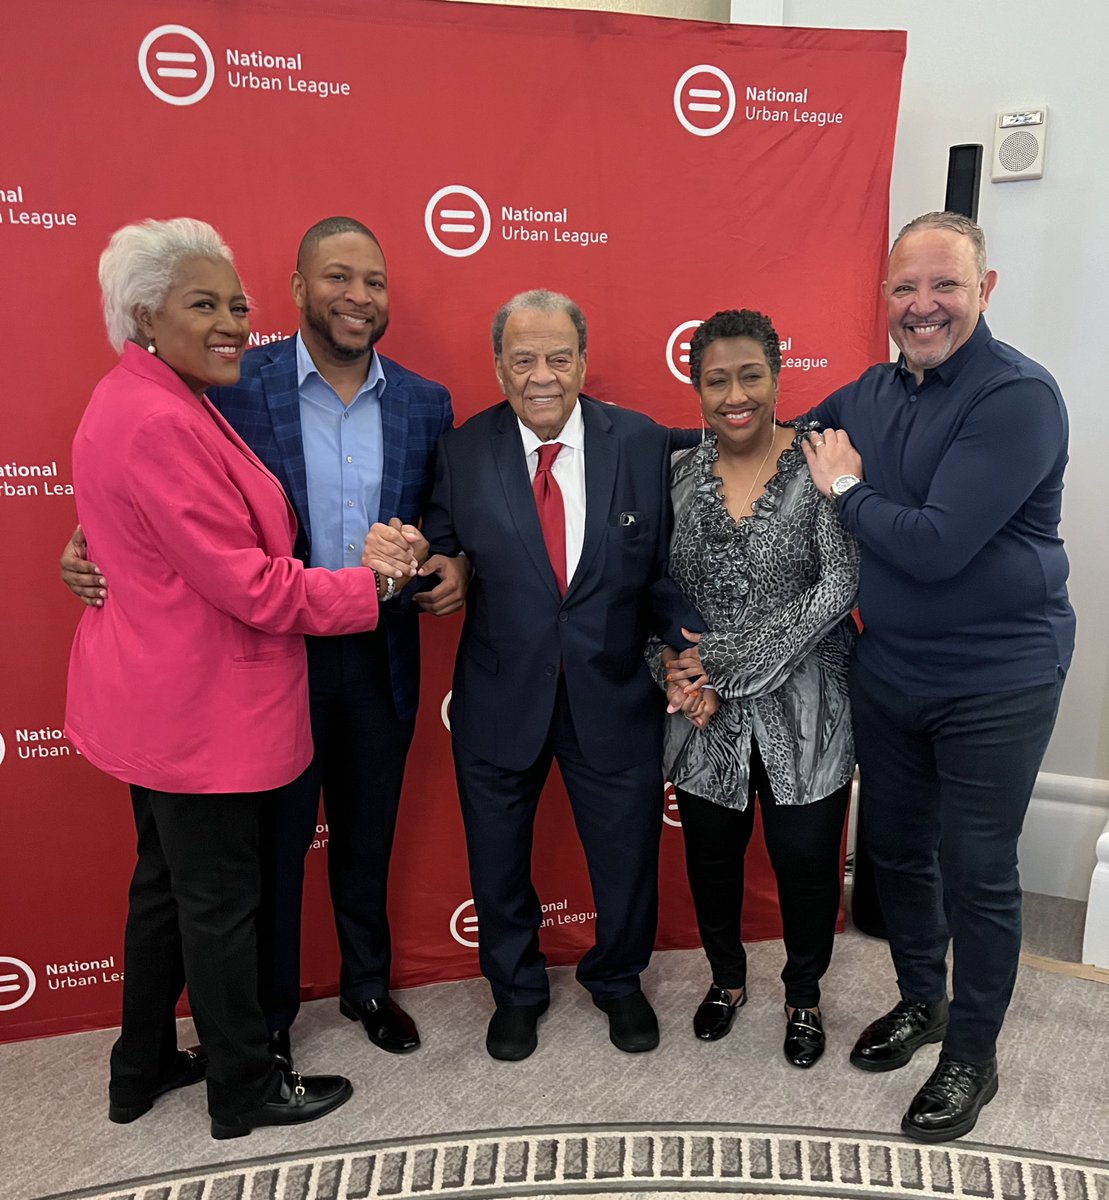 92 years young and forever our hero. We had the distinct honor of presenting @AmbAndrewYoung with a lifetime achievement award for his decades-long dedication to civil rights and public service. We’re indebted & inspired.